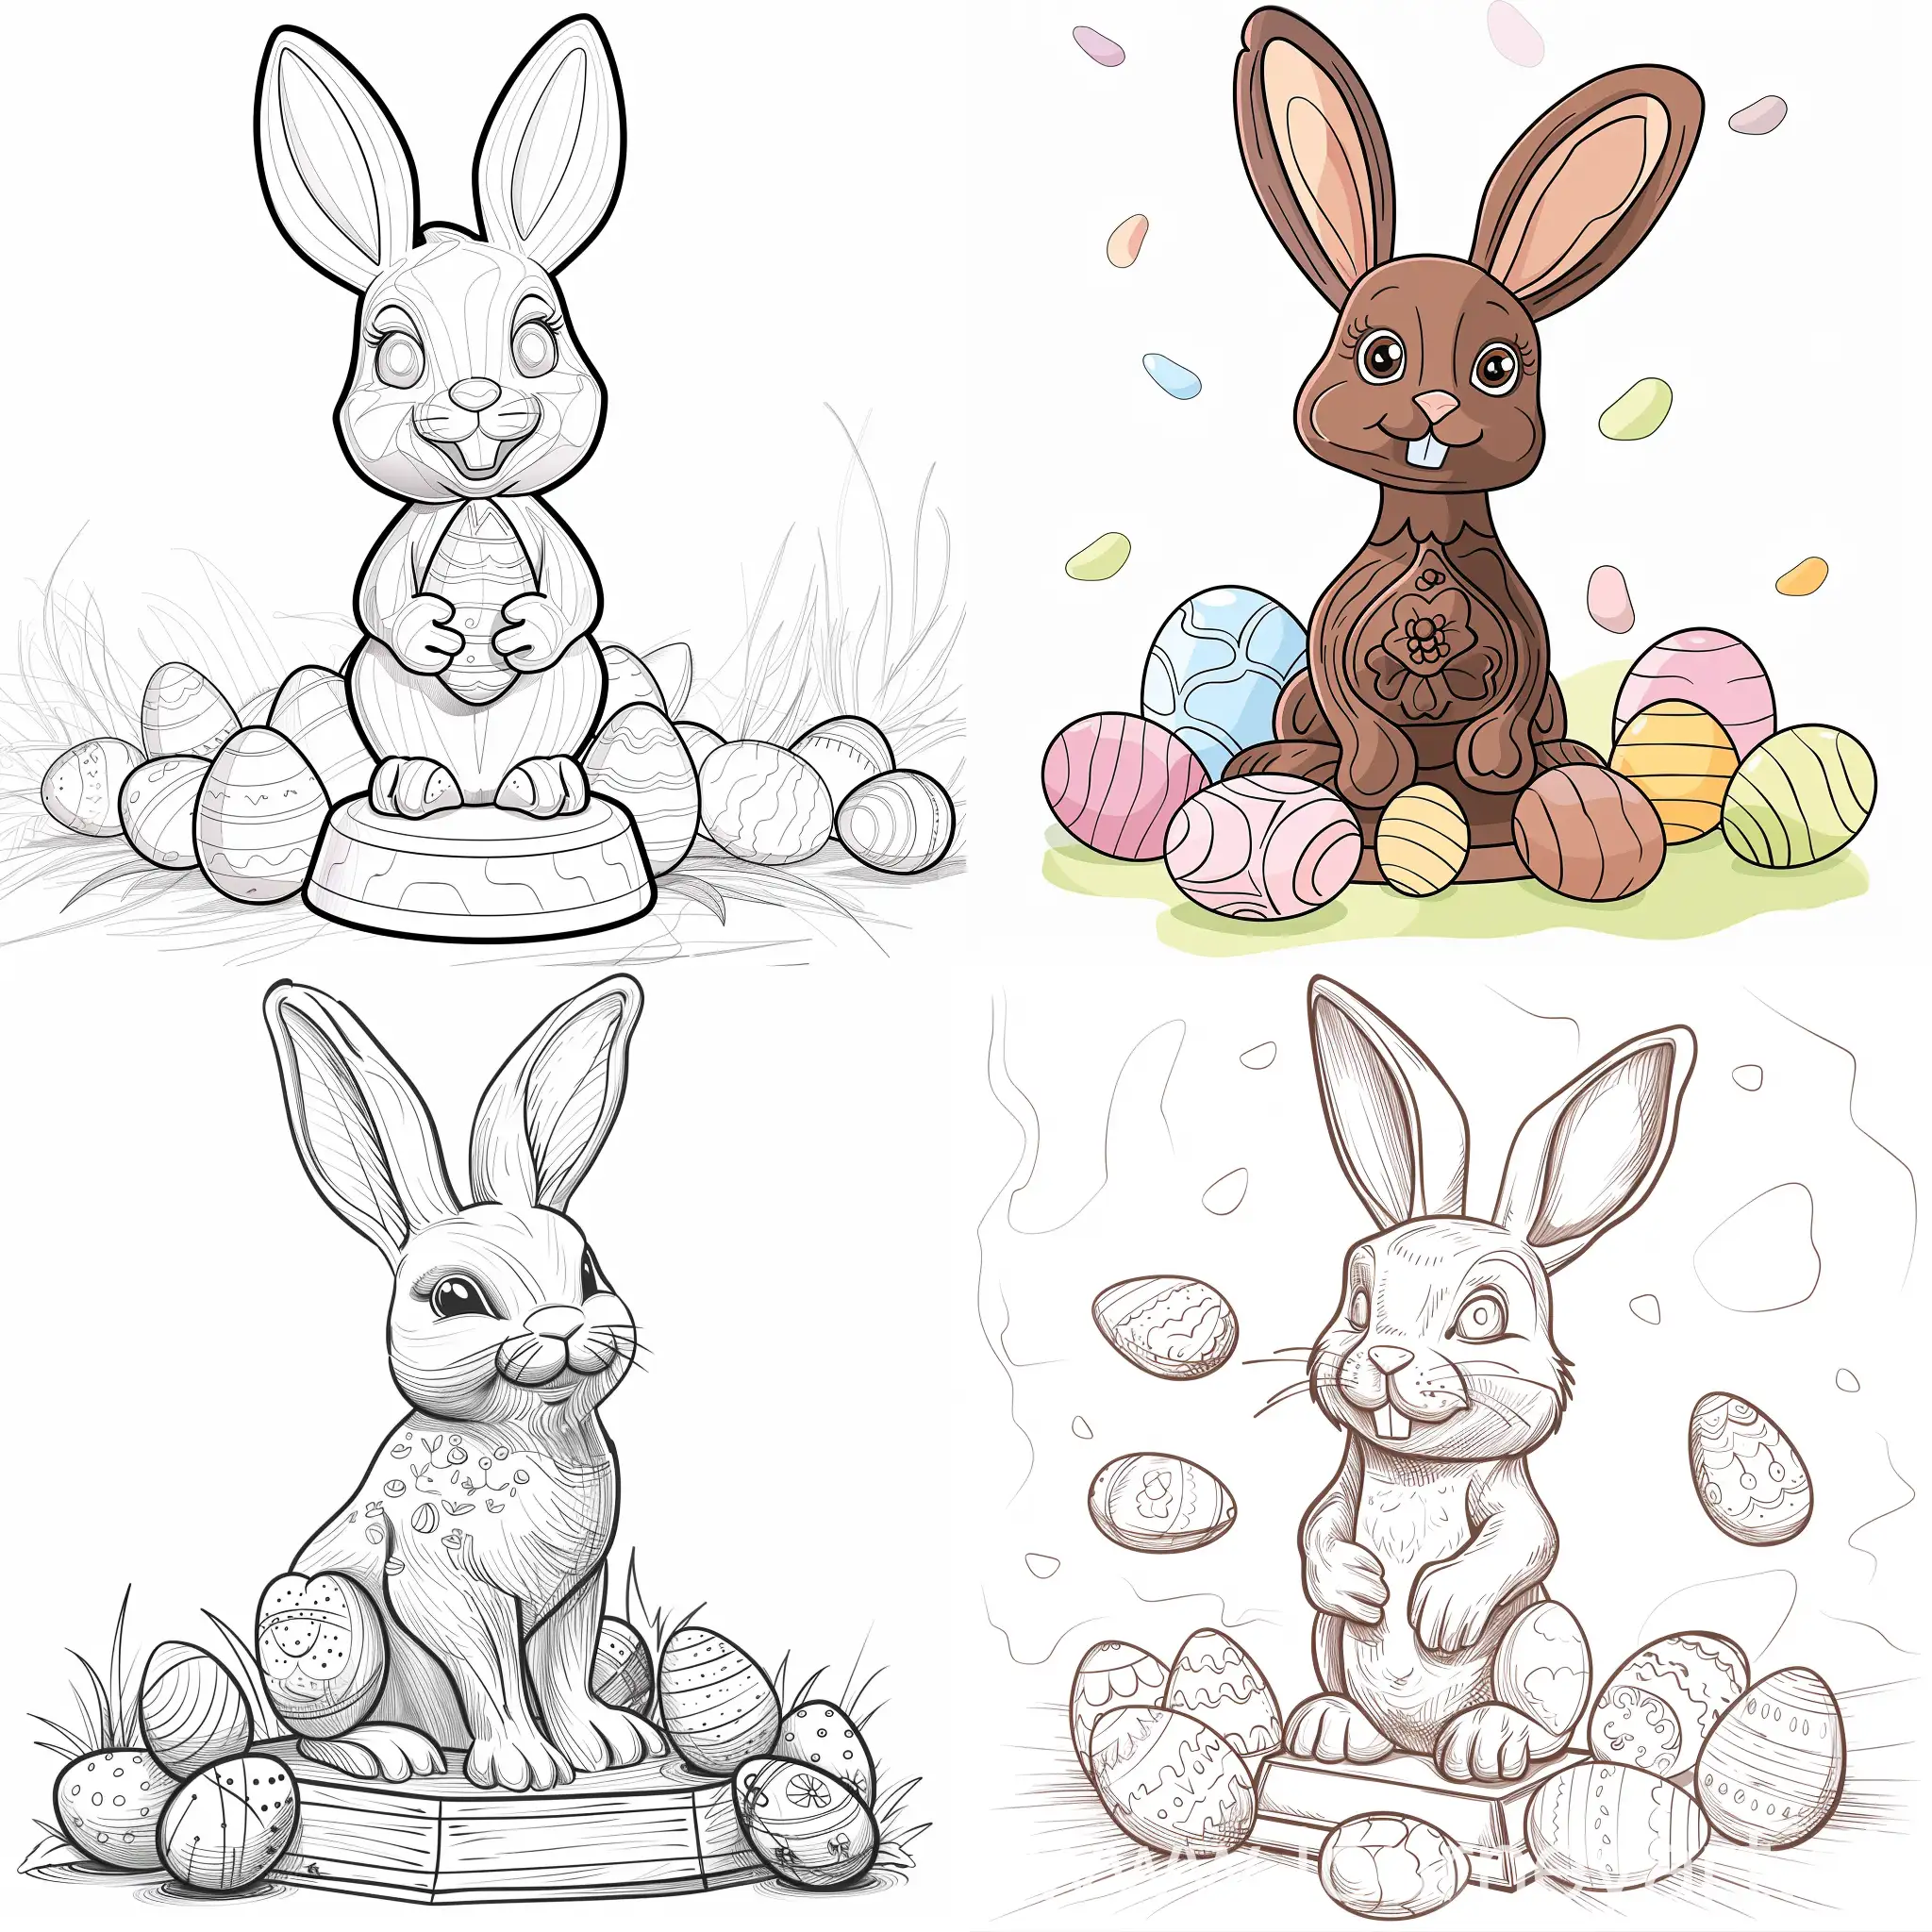 A simple perfect outline cute cartoon drawing of a chocolate Easter bunny statue surrounded by real Easter eggs for a children's coloring book without shadow, can see the full image, without any crop, no details